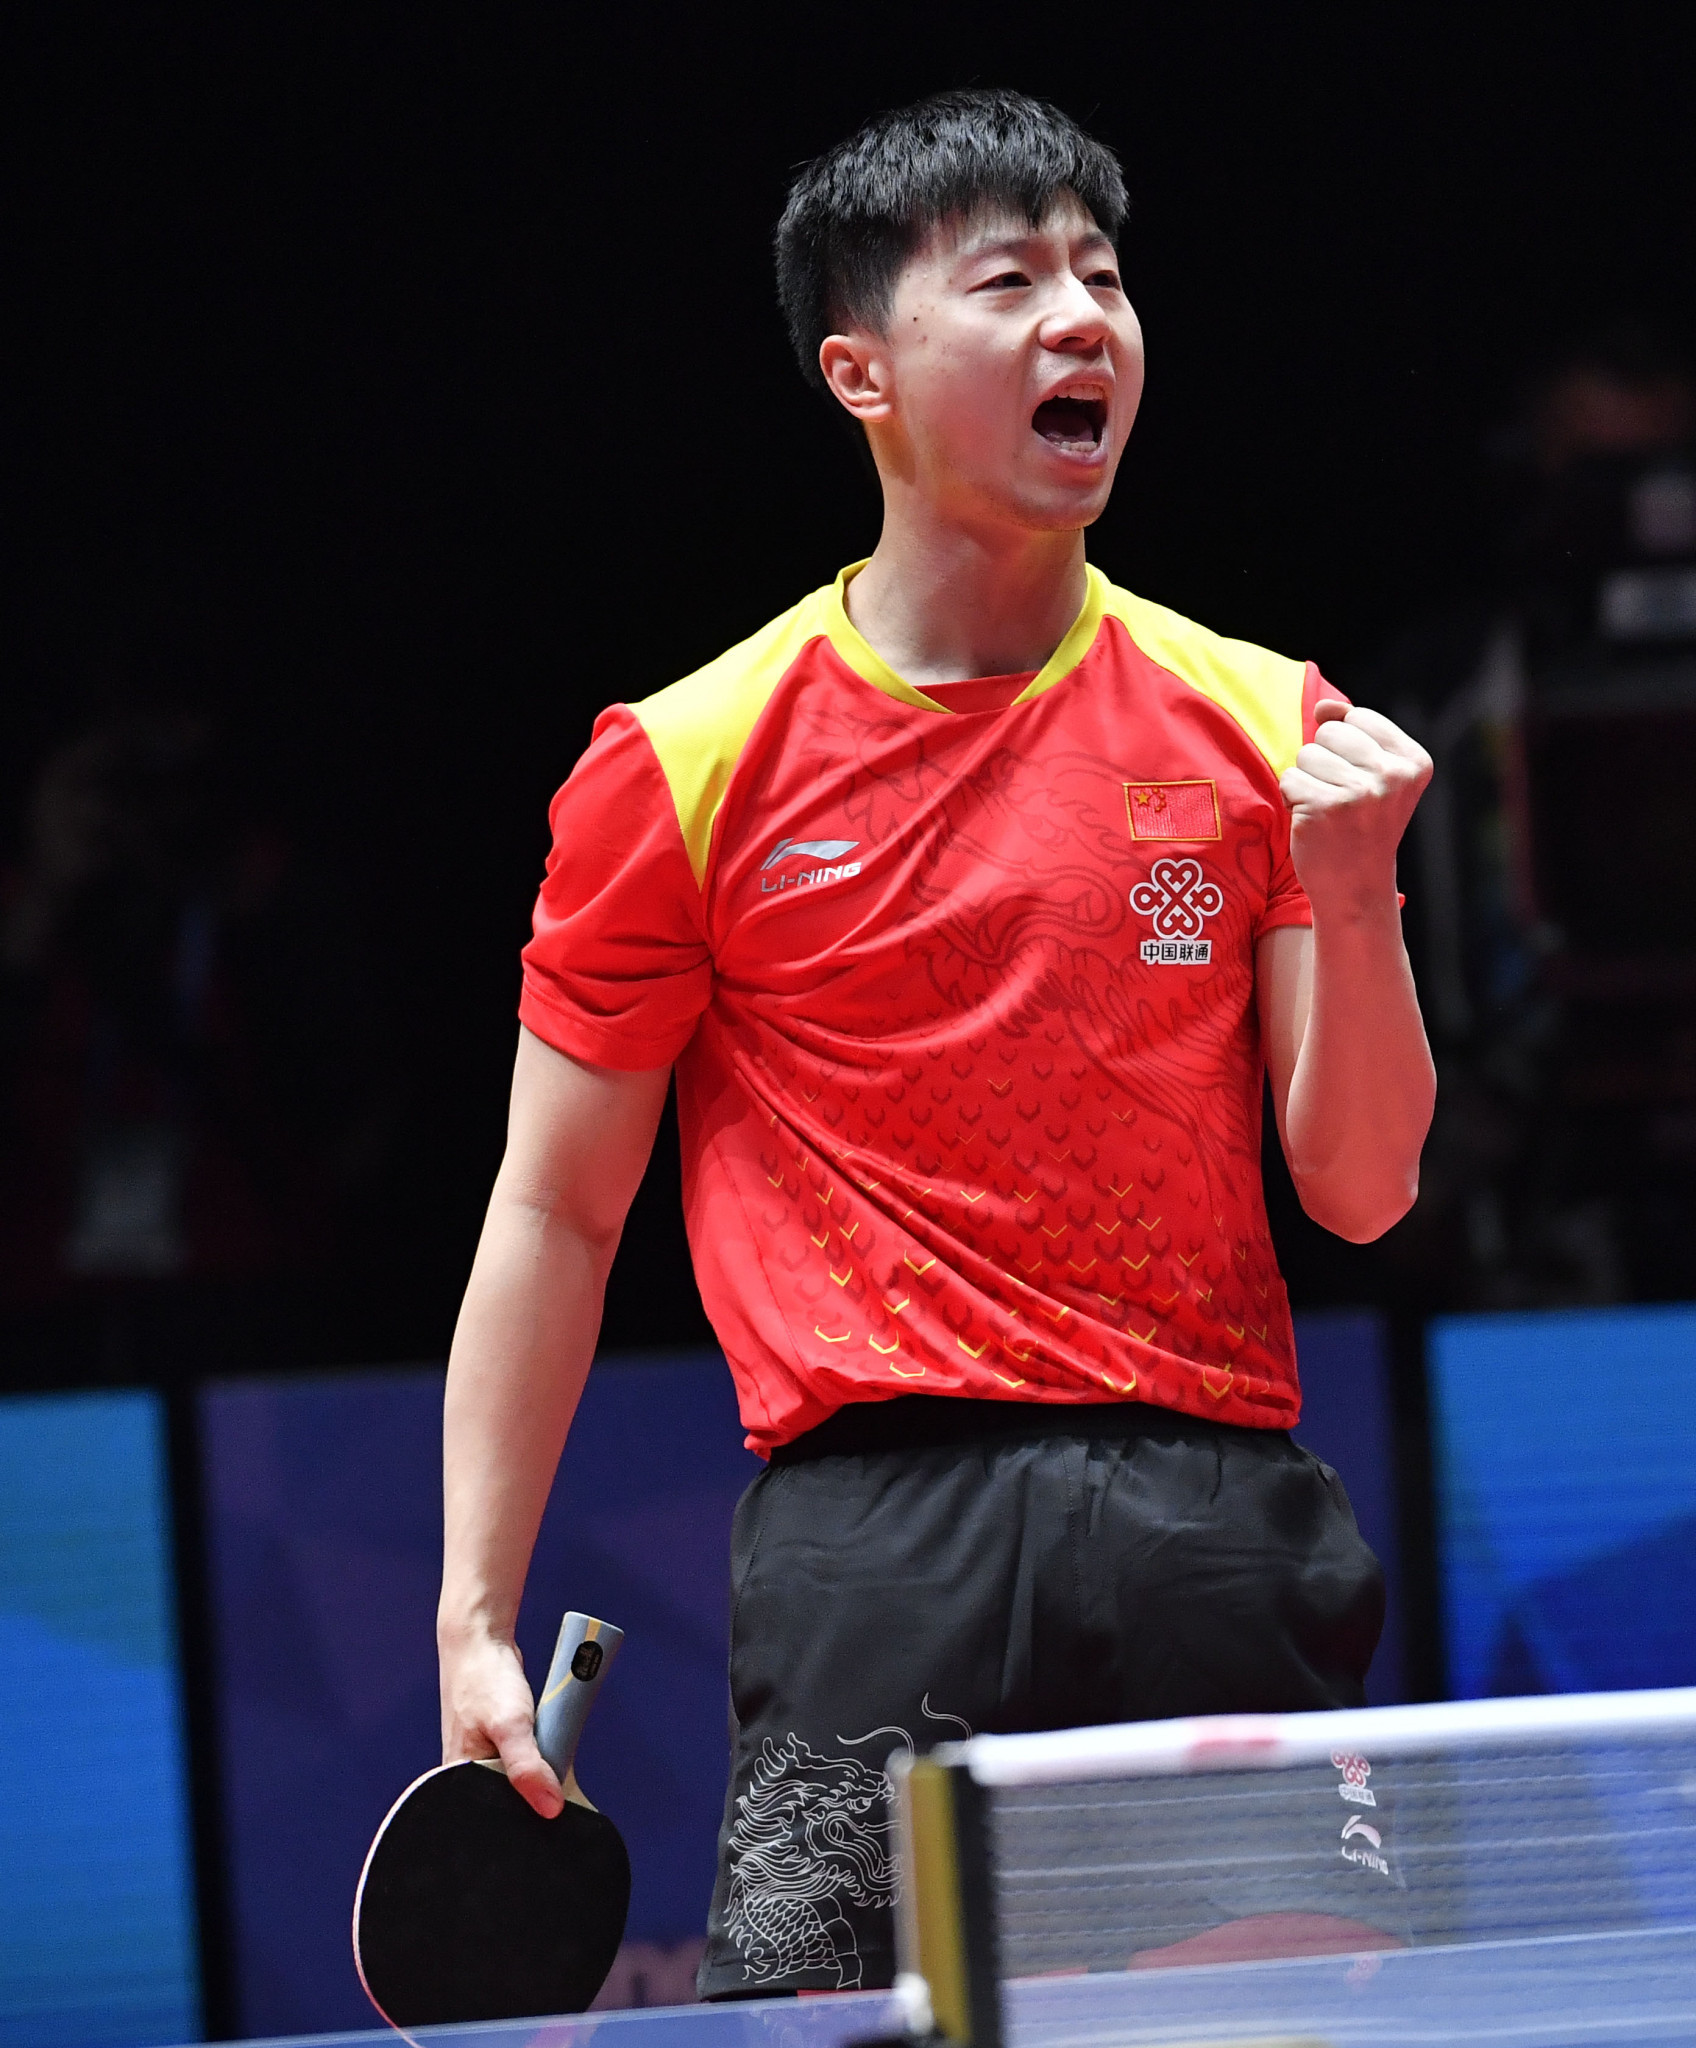 World and Olympic champion Ma Long advanced to the men's final ©Getty Images